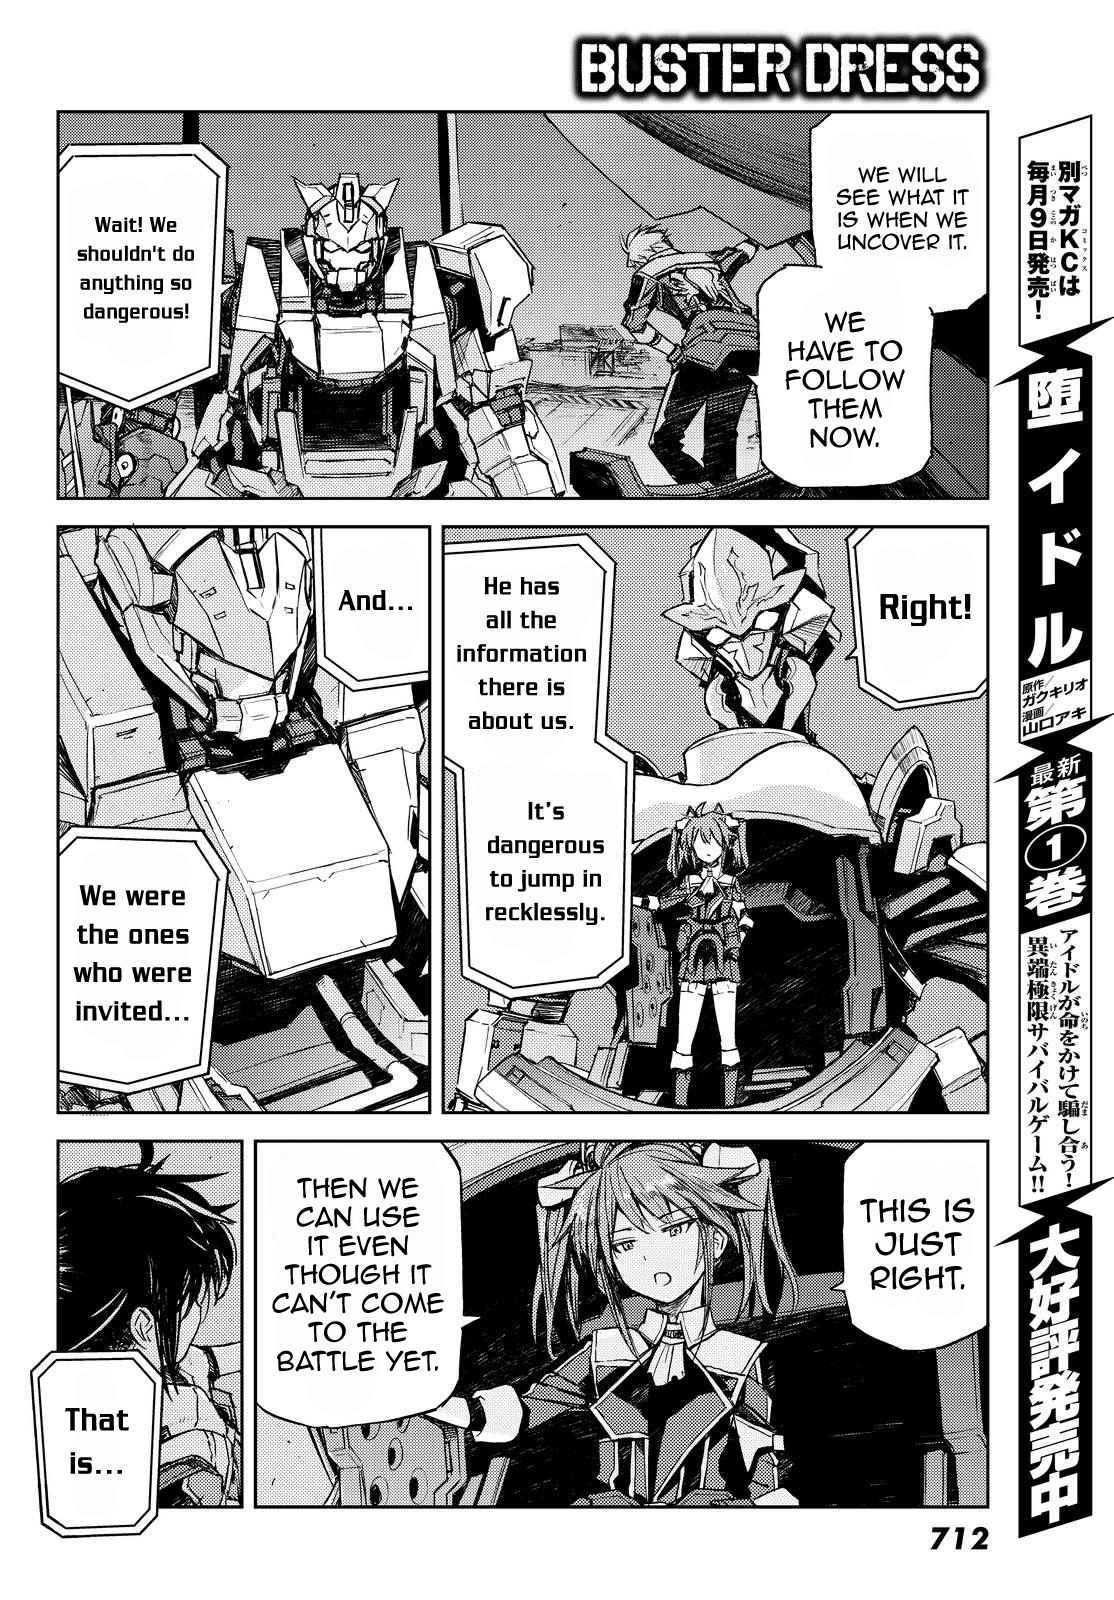 Buster Dress Vol. 2 Ch. 7.2 The Knights of Death 3.